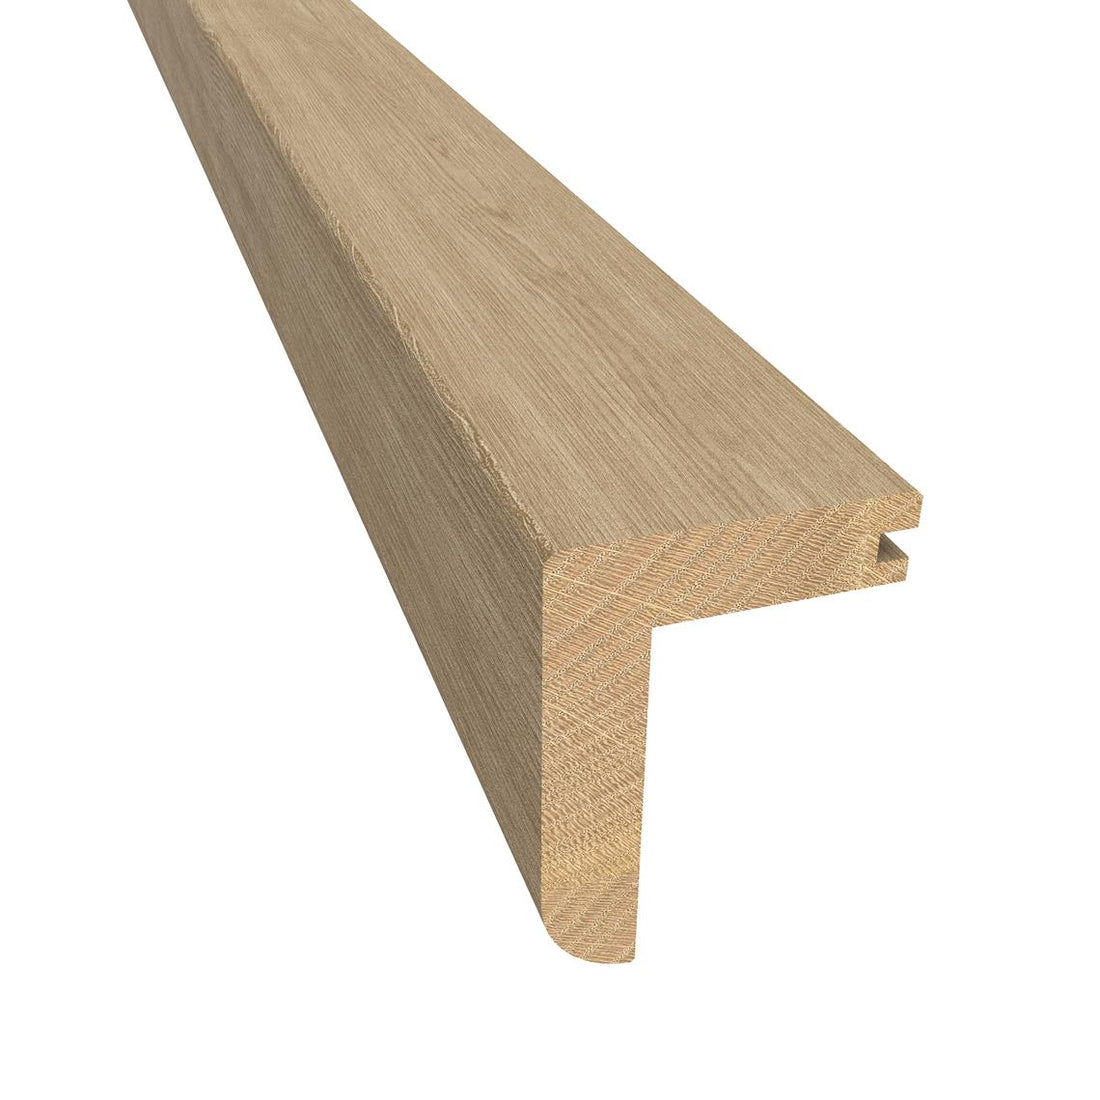 Kahrs Stairnose 15mm Tongue and Groove 56 x 40 x 1200mm